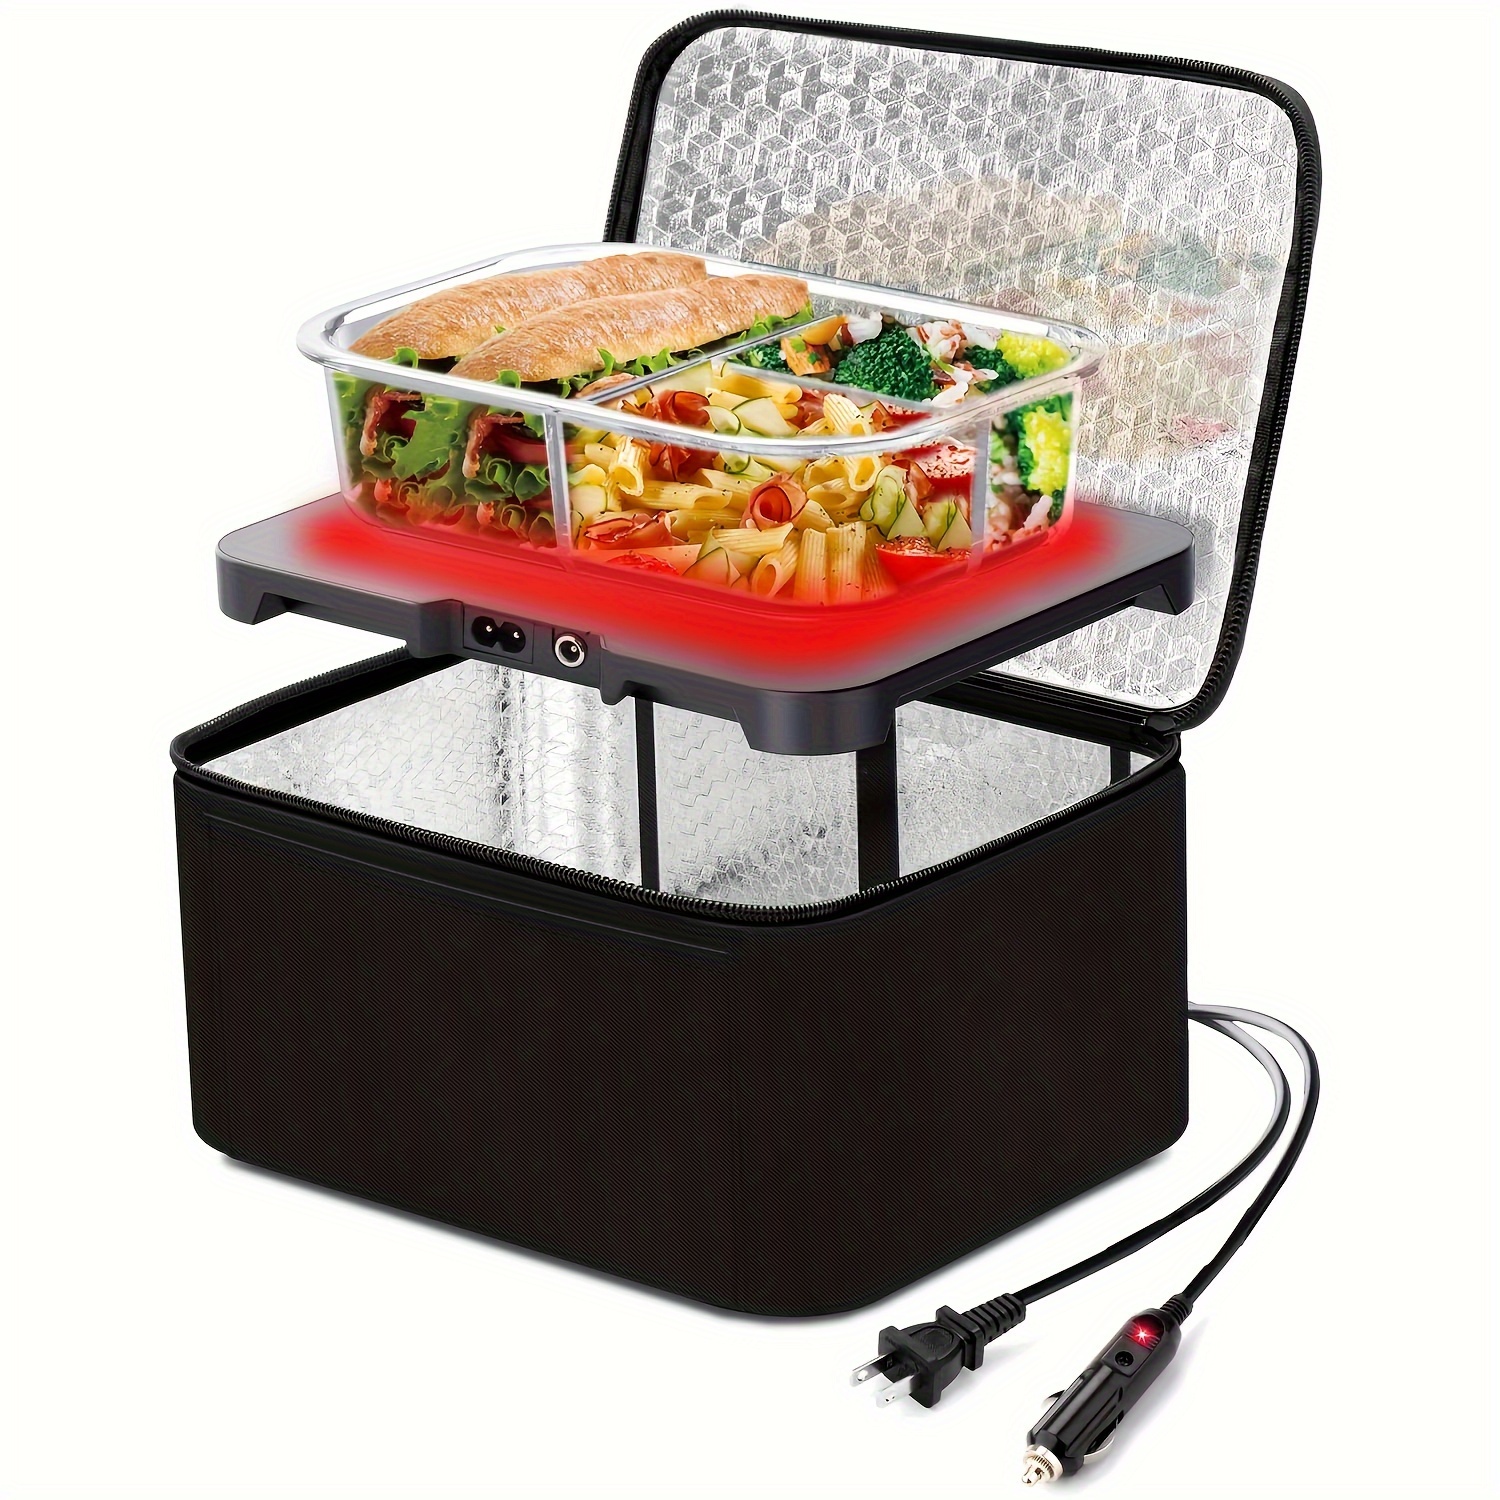 

Portable Oven, 12v Car Food Warmer Portable Personal Mini Oven Electric Heated Lunch Box For Meals Reheating & Raw Food Cooking For Road Trip/camping/picnic/family Gathering (black)